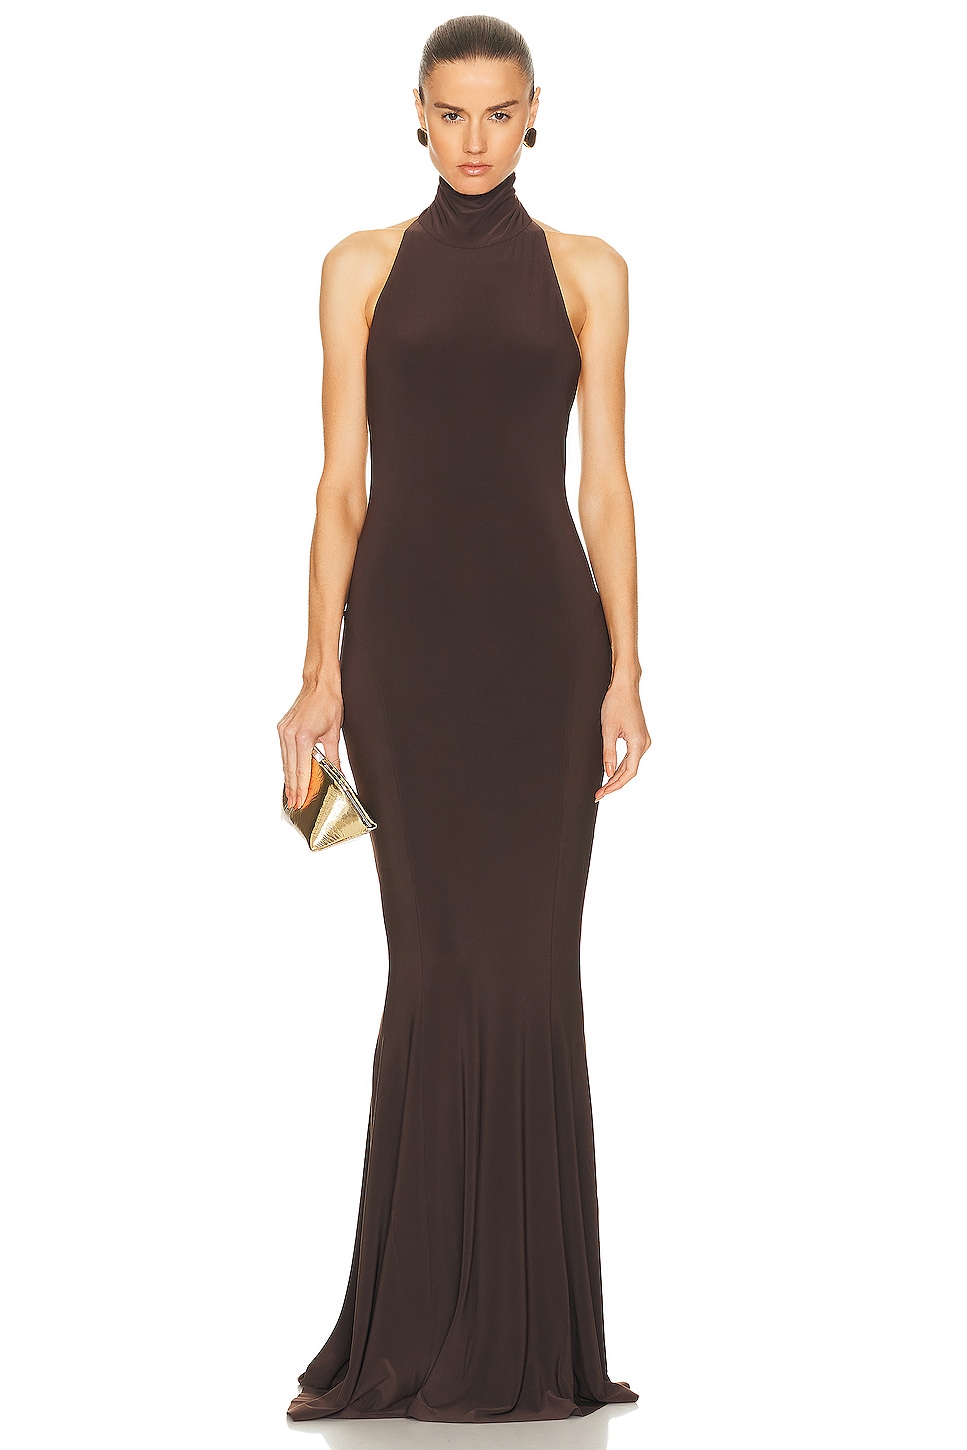 Image 1 of Norma Kamali Halter Turtleneck Fishtail Gown in Chocolate